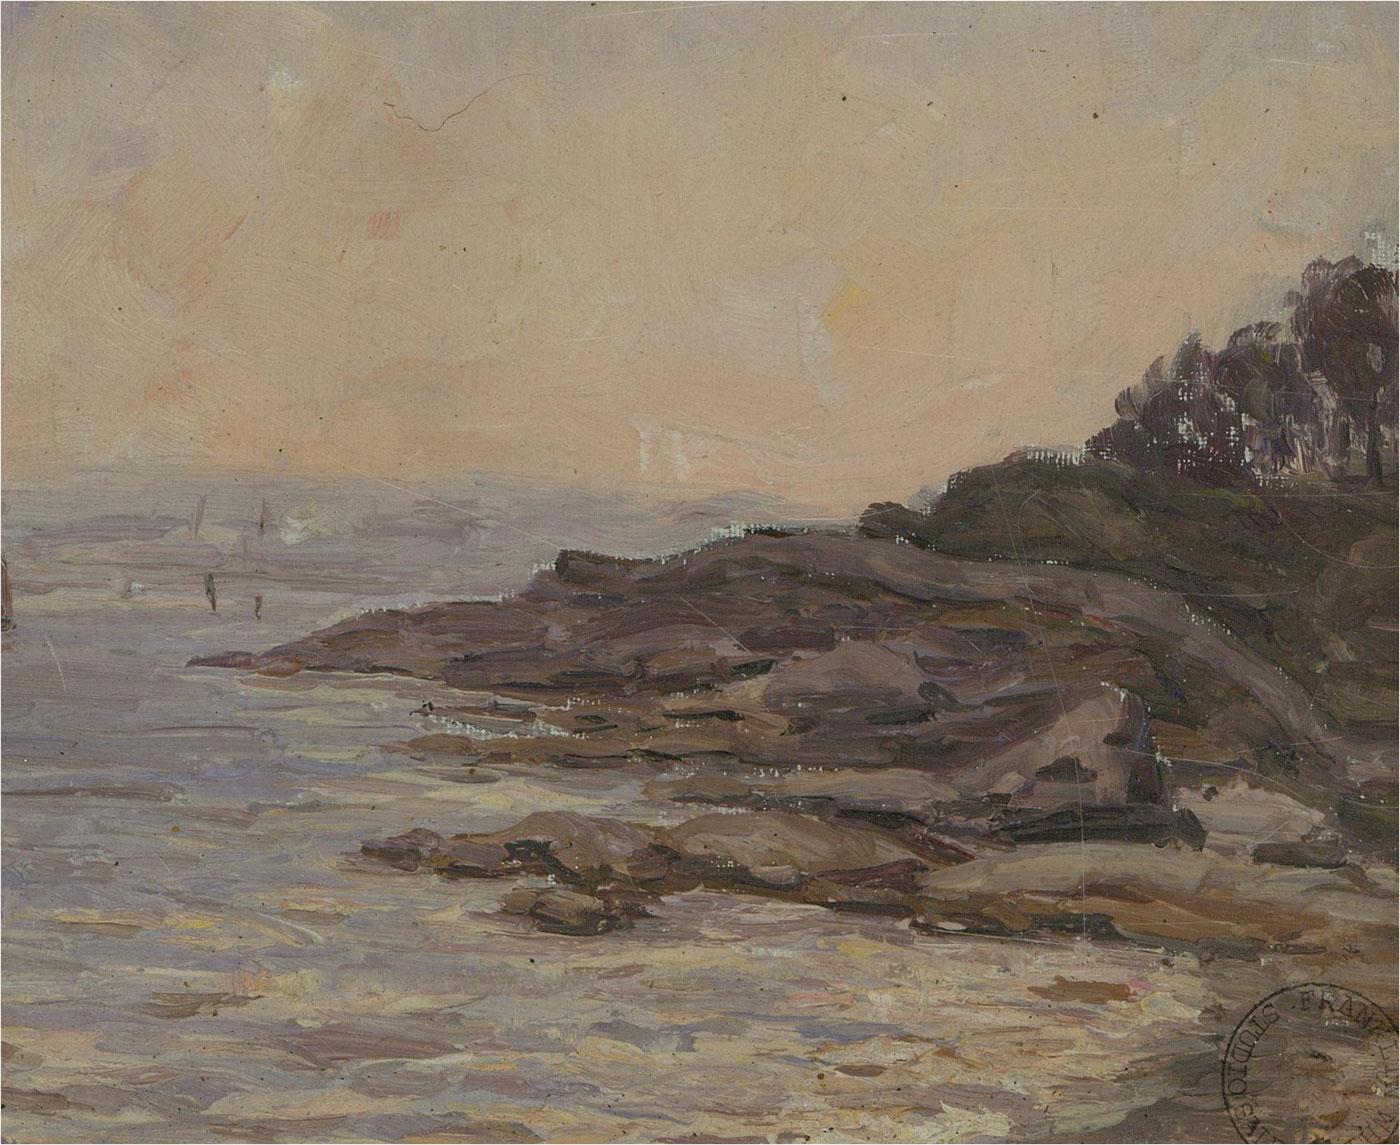 A fine oil showing a rocky coastline jutting out into the sea under a hazy, pastel sky. The painting is unsigned but has the official Franklin White studio sale stamp in the lower right corner. The painting is presented in a smart, gilt effect,